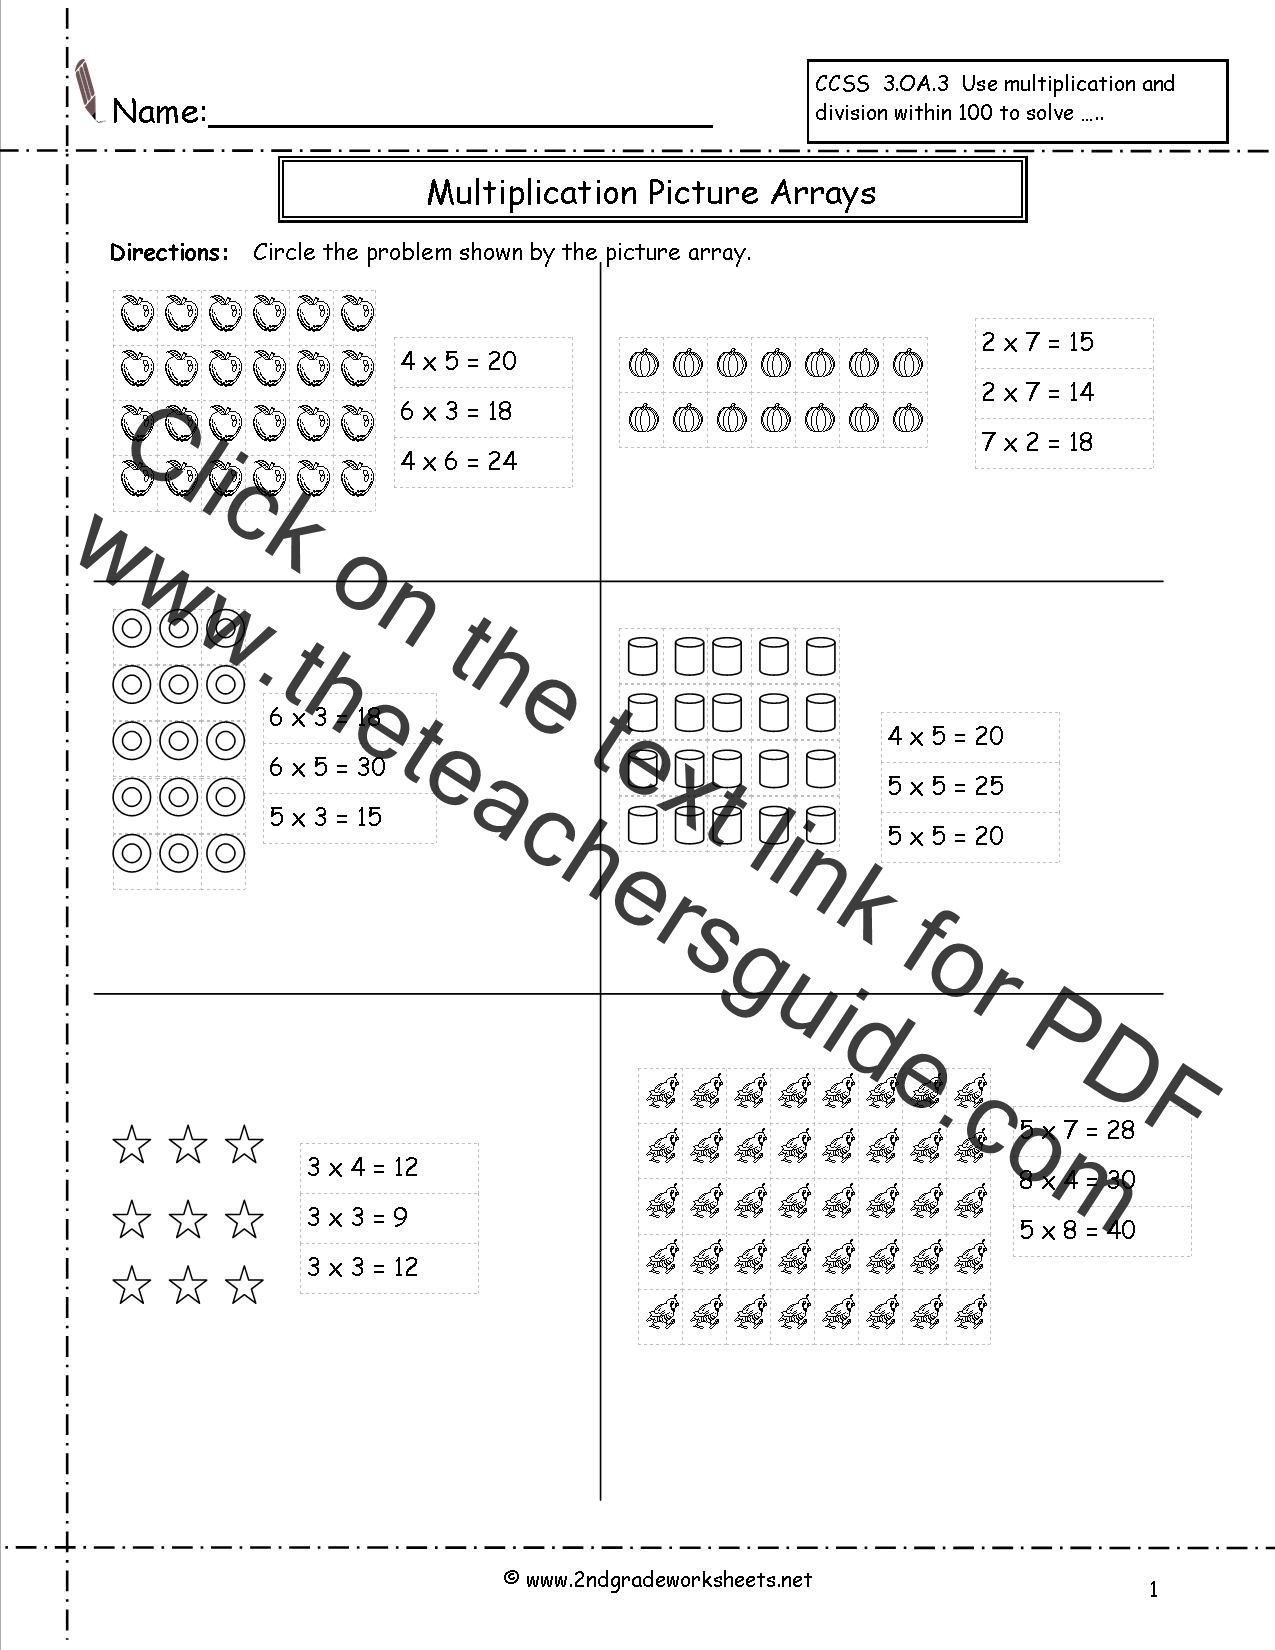 multiplication-arrays-and-repeated-addition-worksheets-free-printable